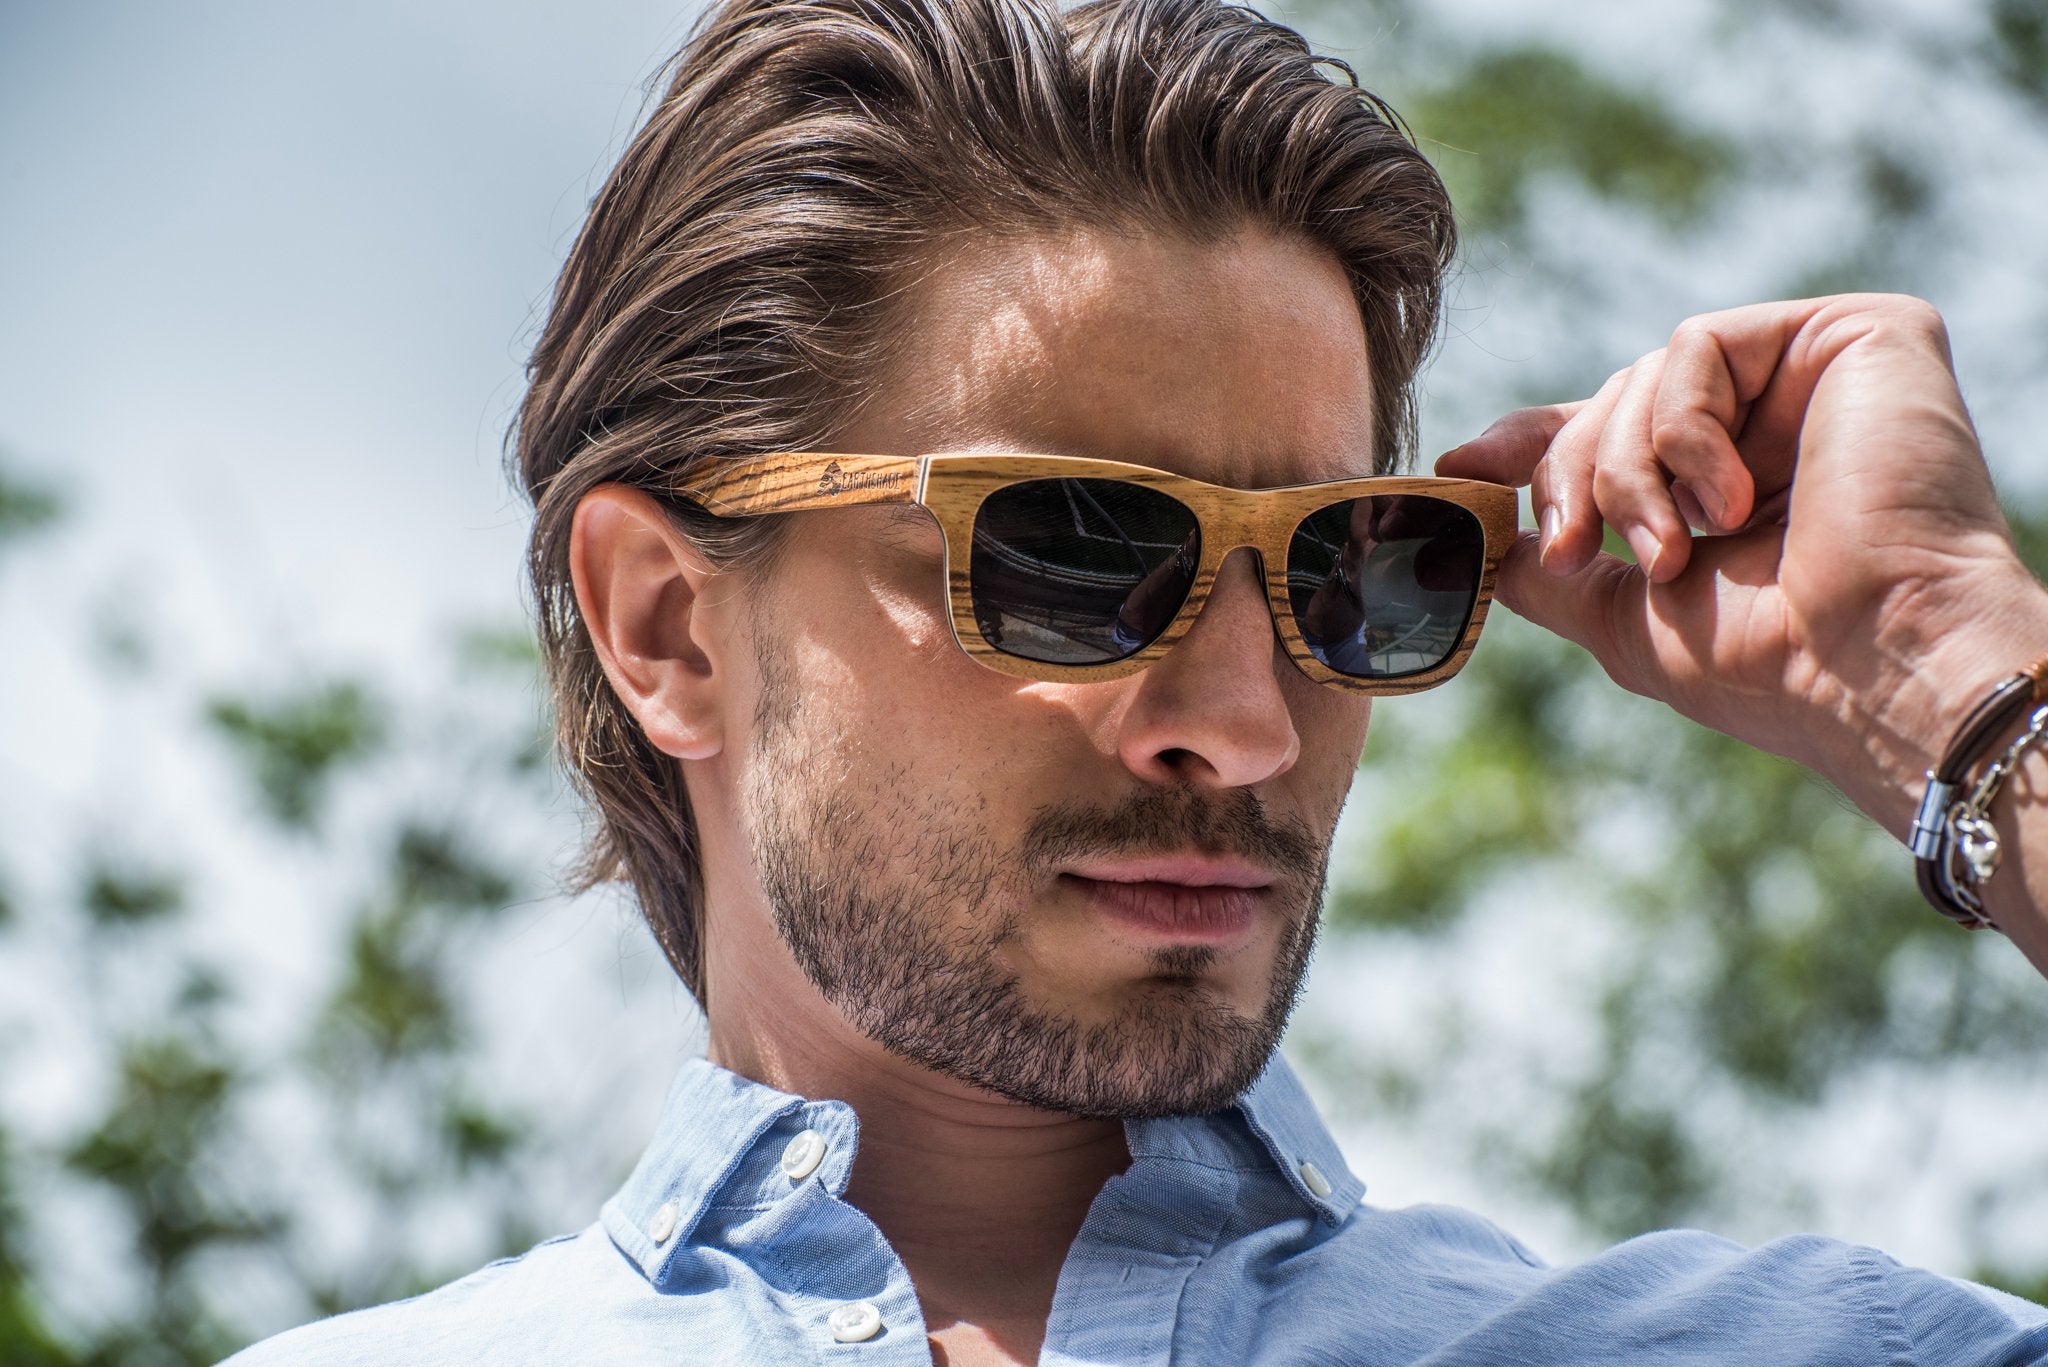 Super Cool Personalized Sunglasses for your Guy - Wooden Clubmasters -  Groovy Guy Gifts